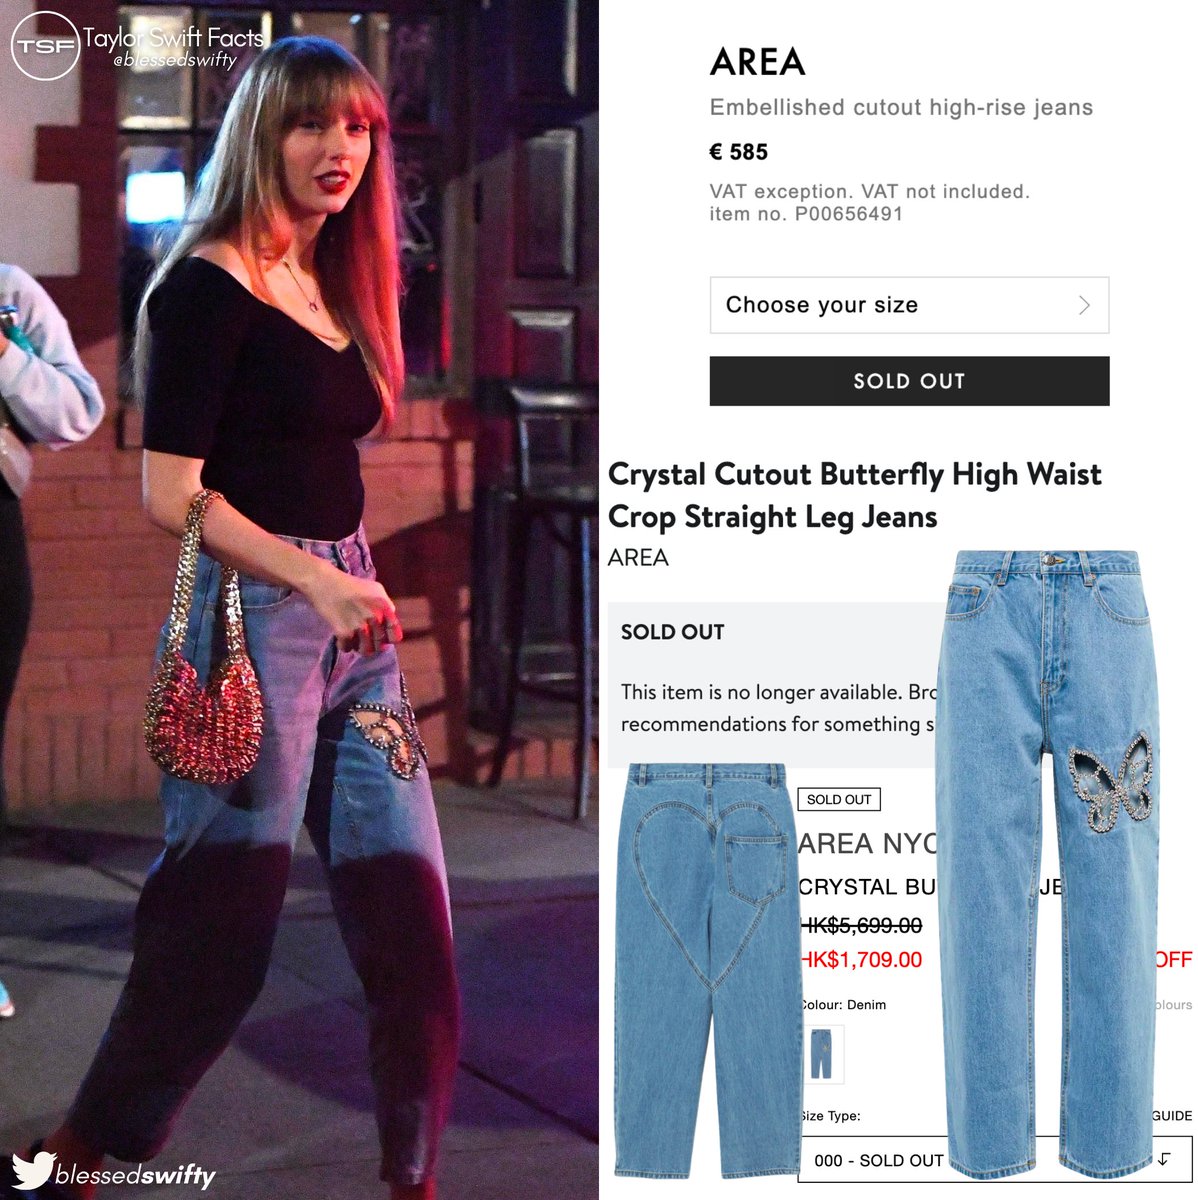 Taylor Swift Facts on X: "‼️ | @TaylorSwift13's $700 jeans she wore to  dinner in New York City have SOLD OUT from retailers in a few hours.  https://t.co/A1MYsWxmZJ" / X